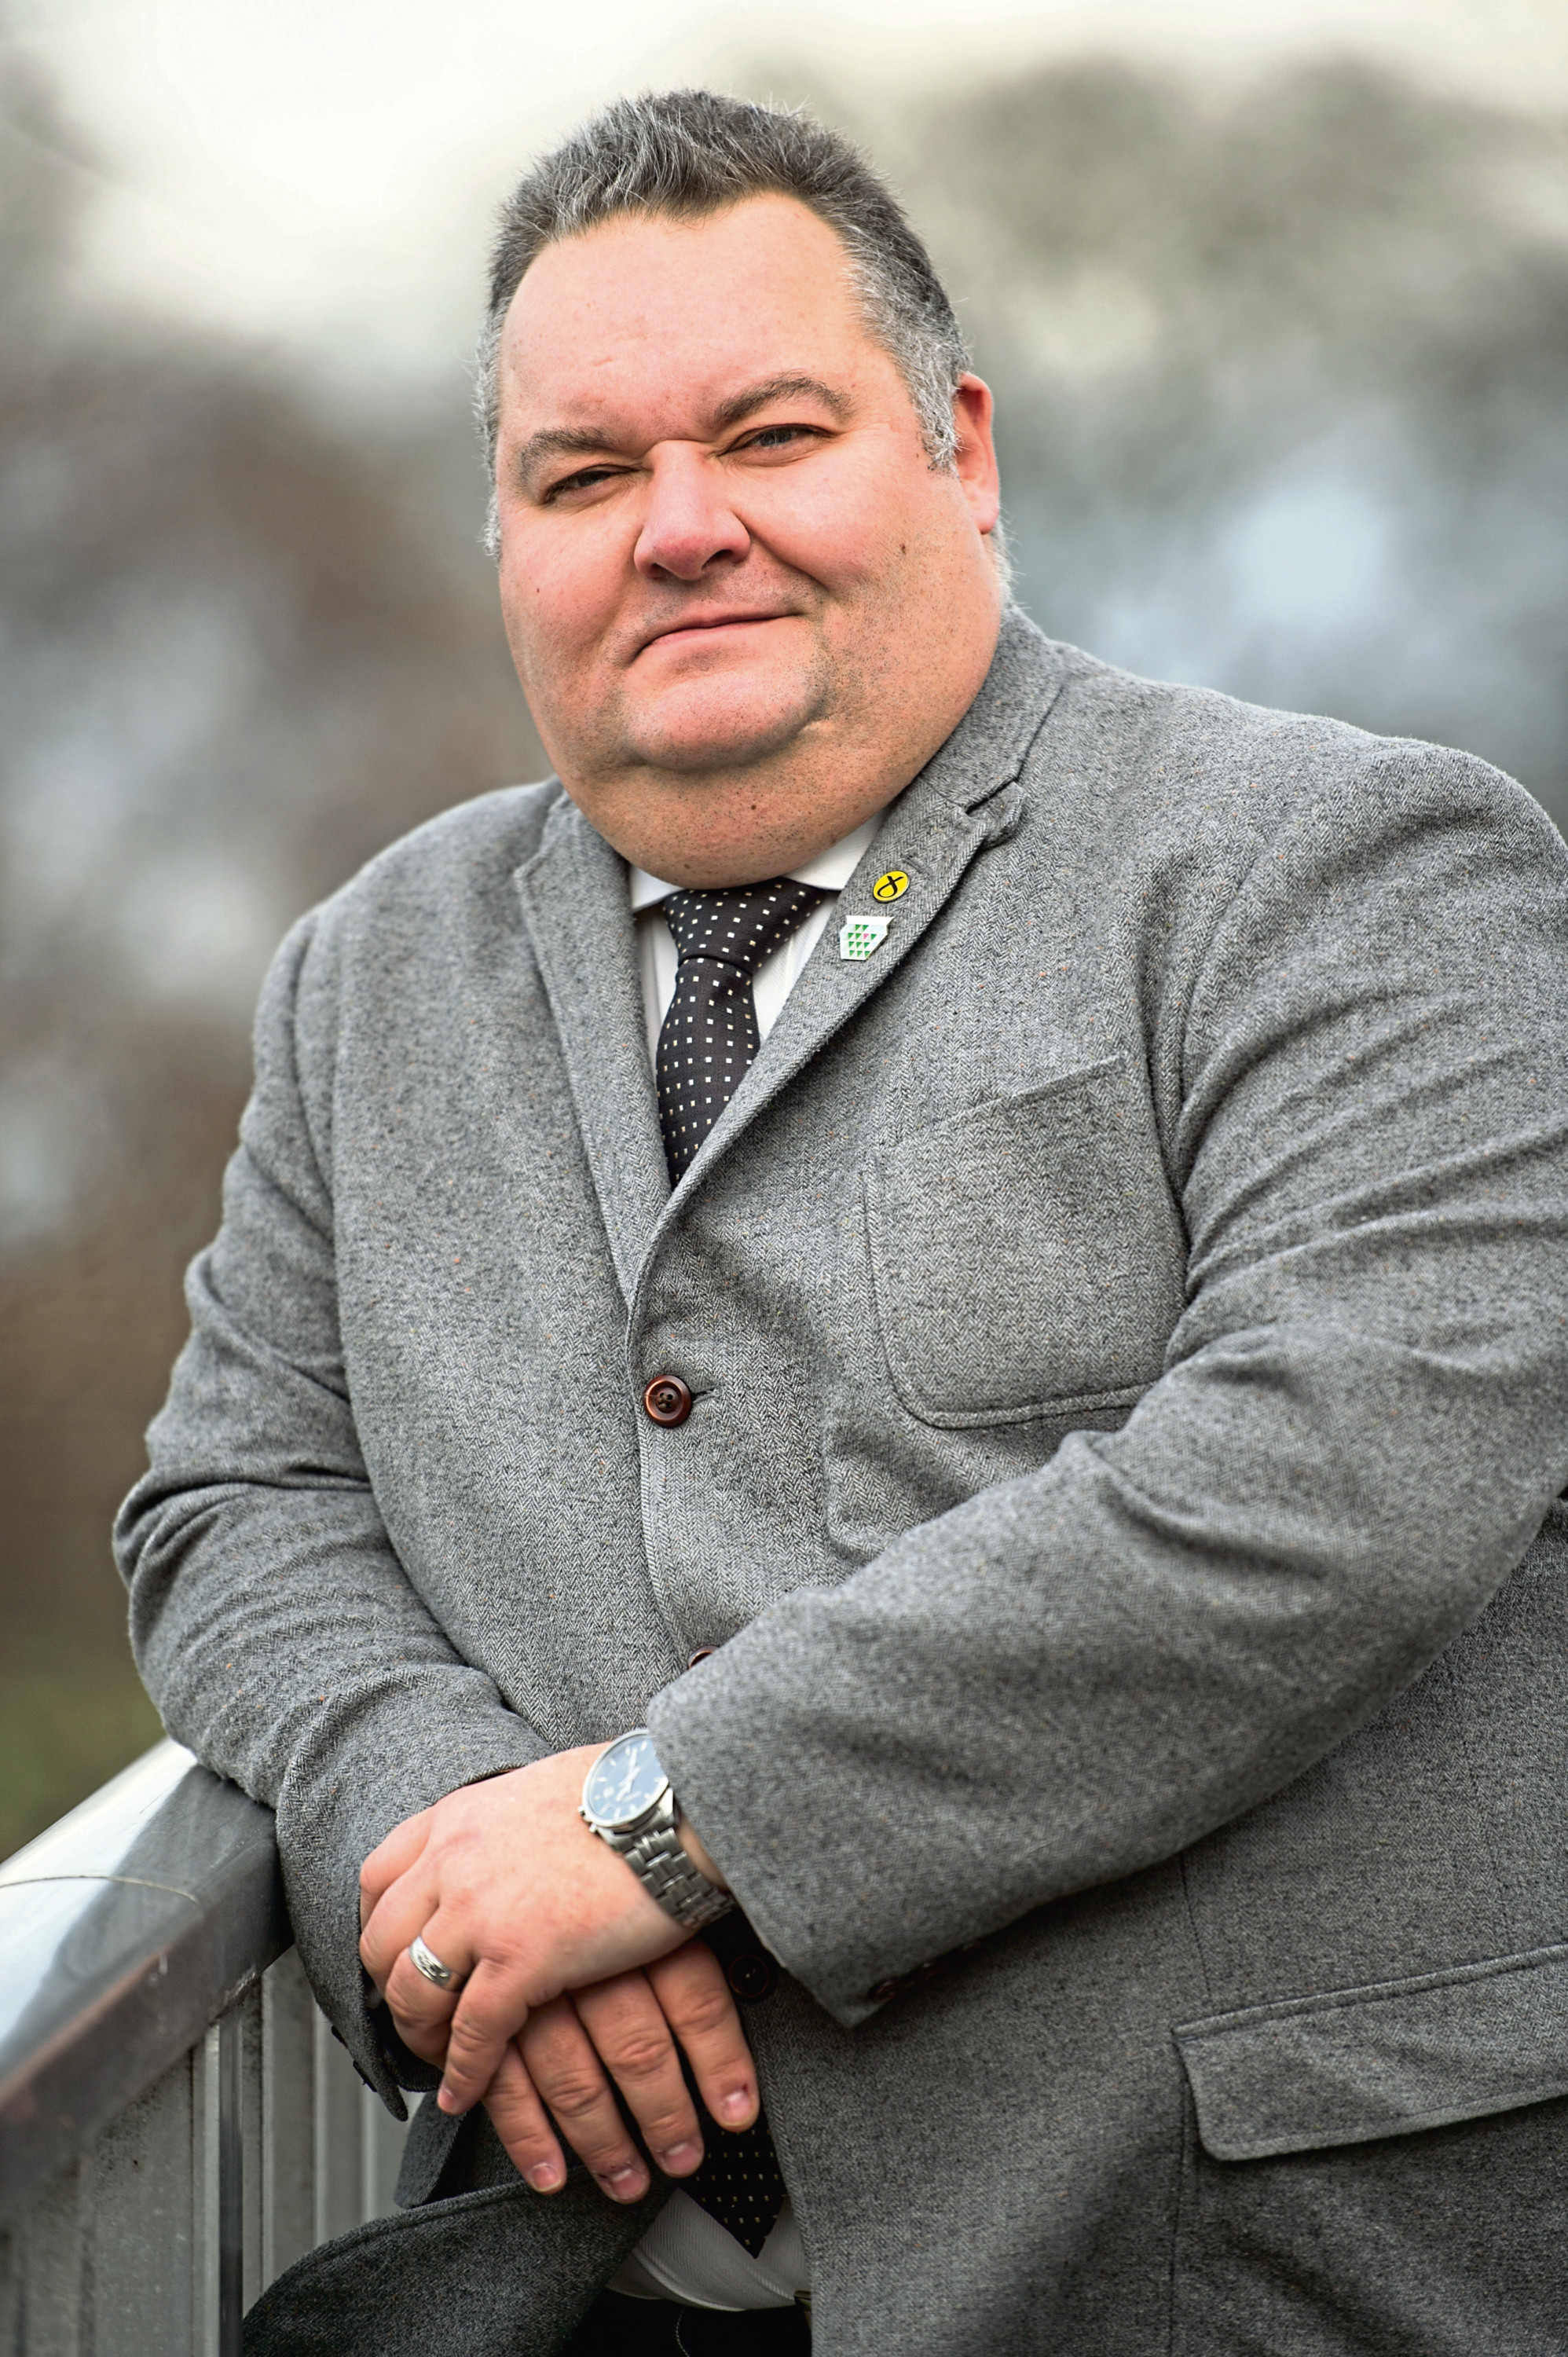 Moray Council Leader, Graham Leadbitter pictured in Elgin, Moray.